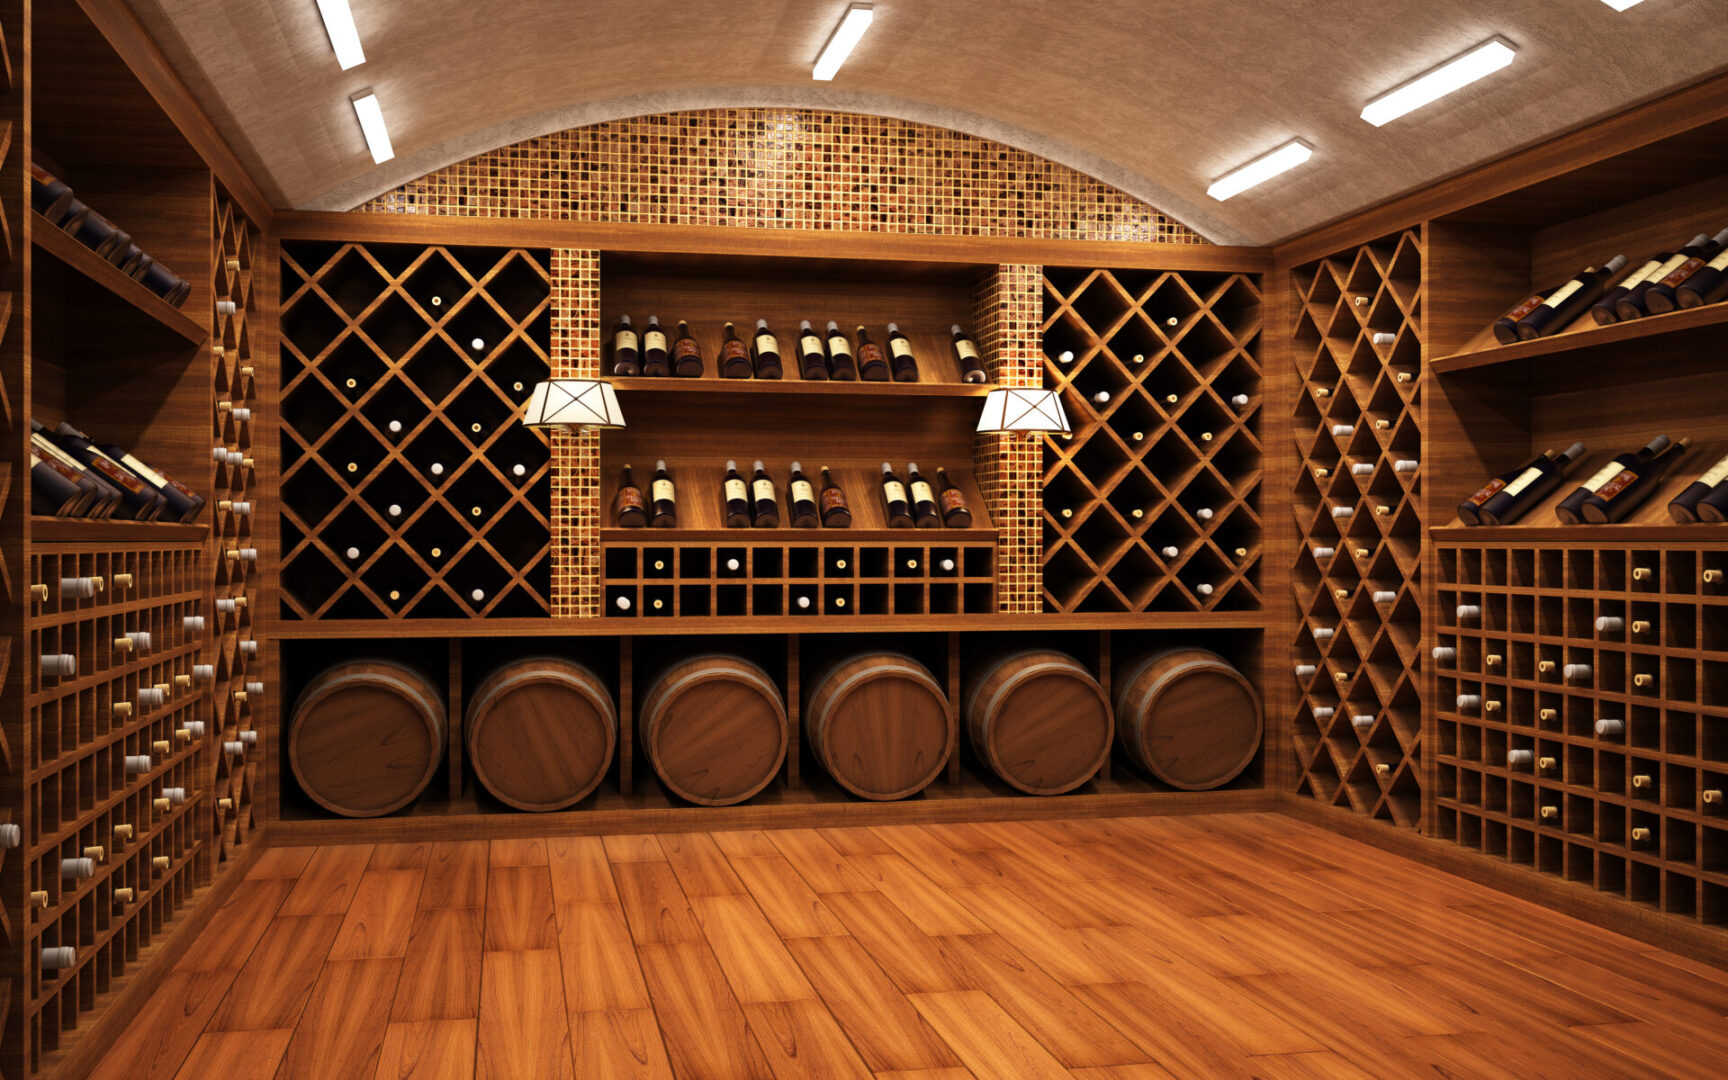 A room with many wine racks and barrels.